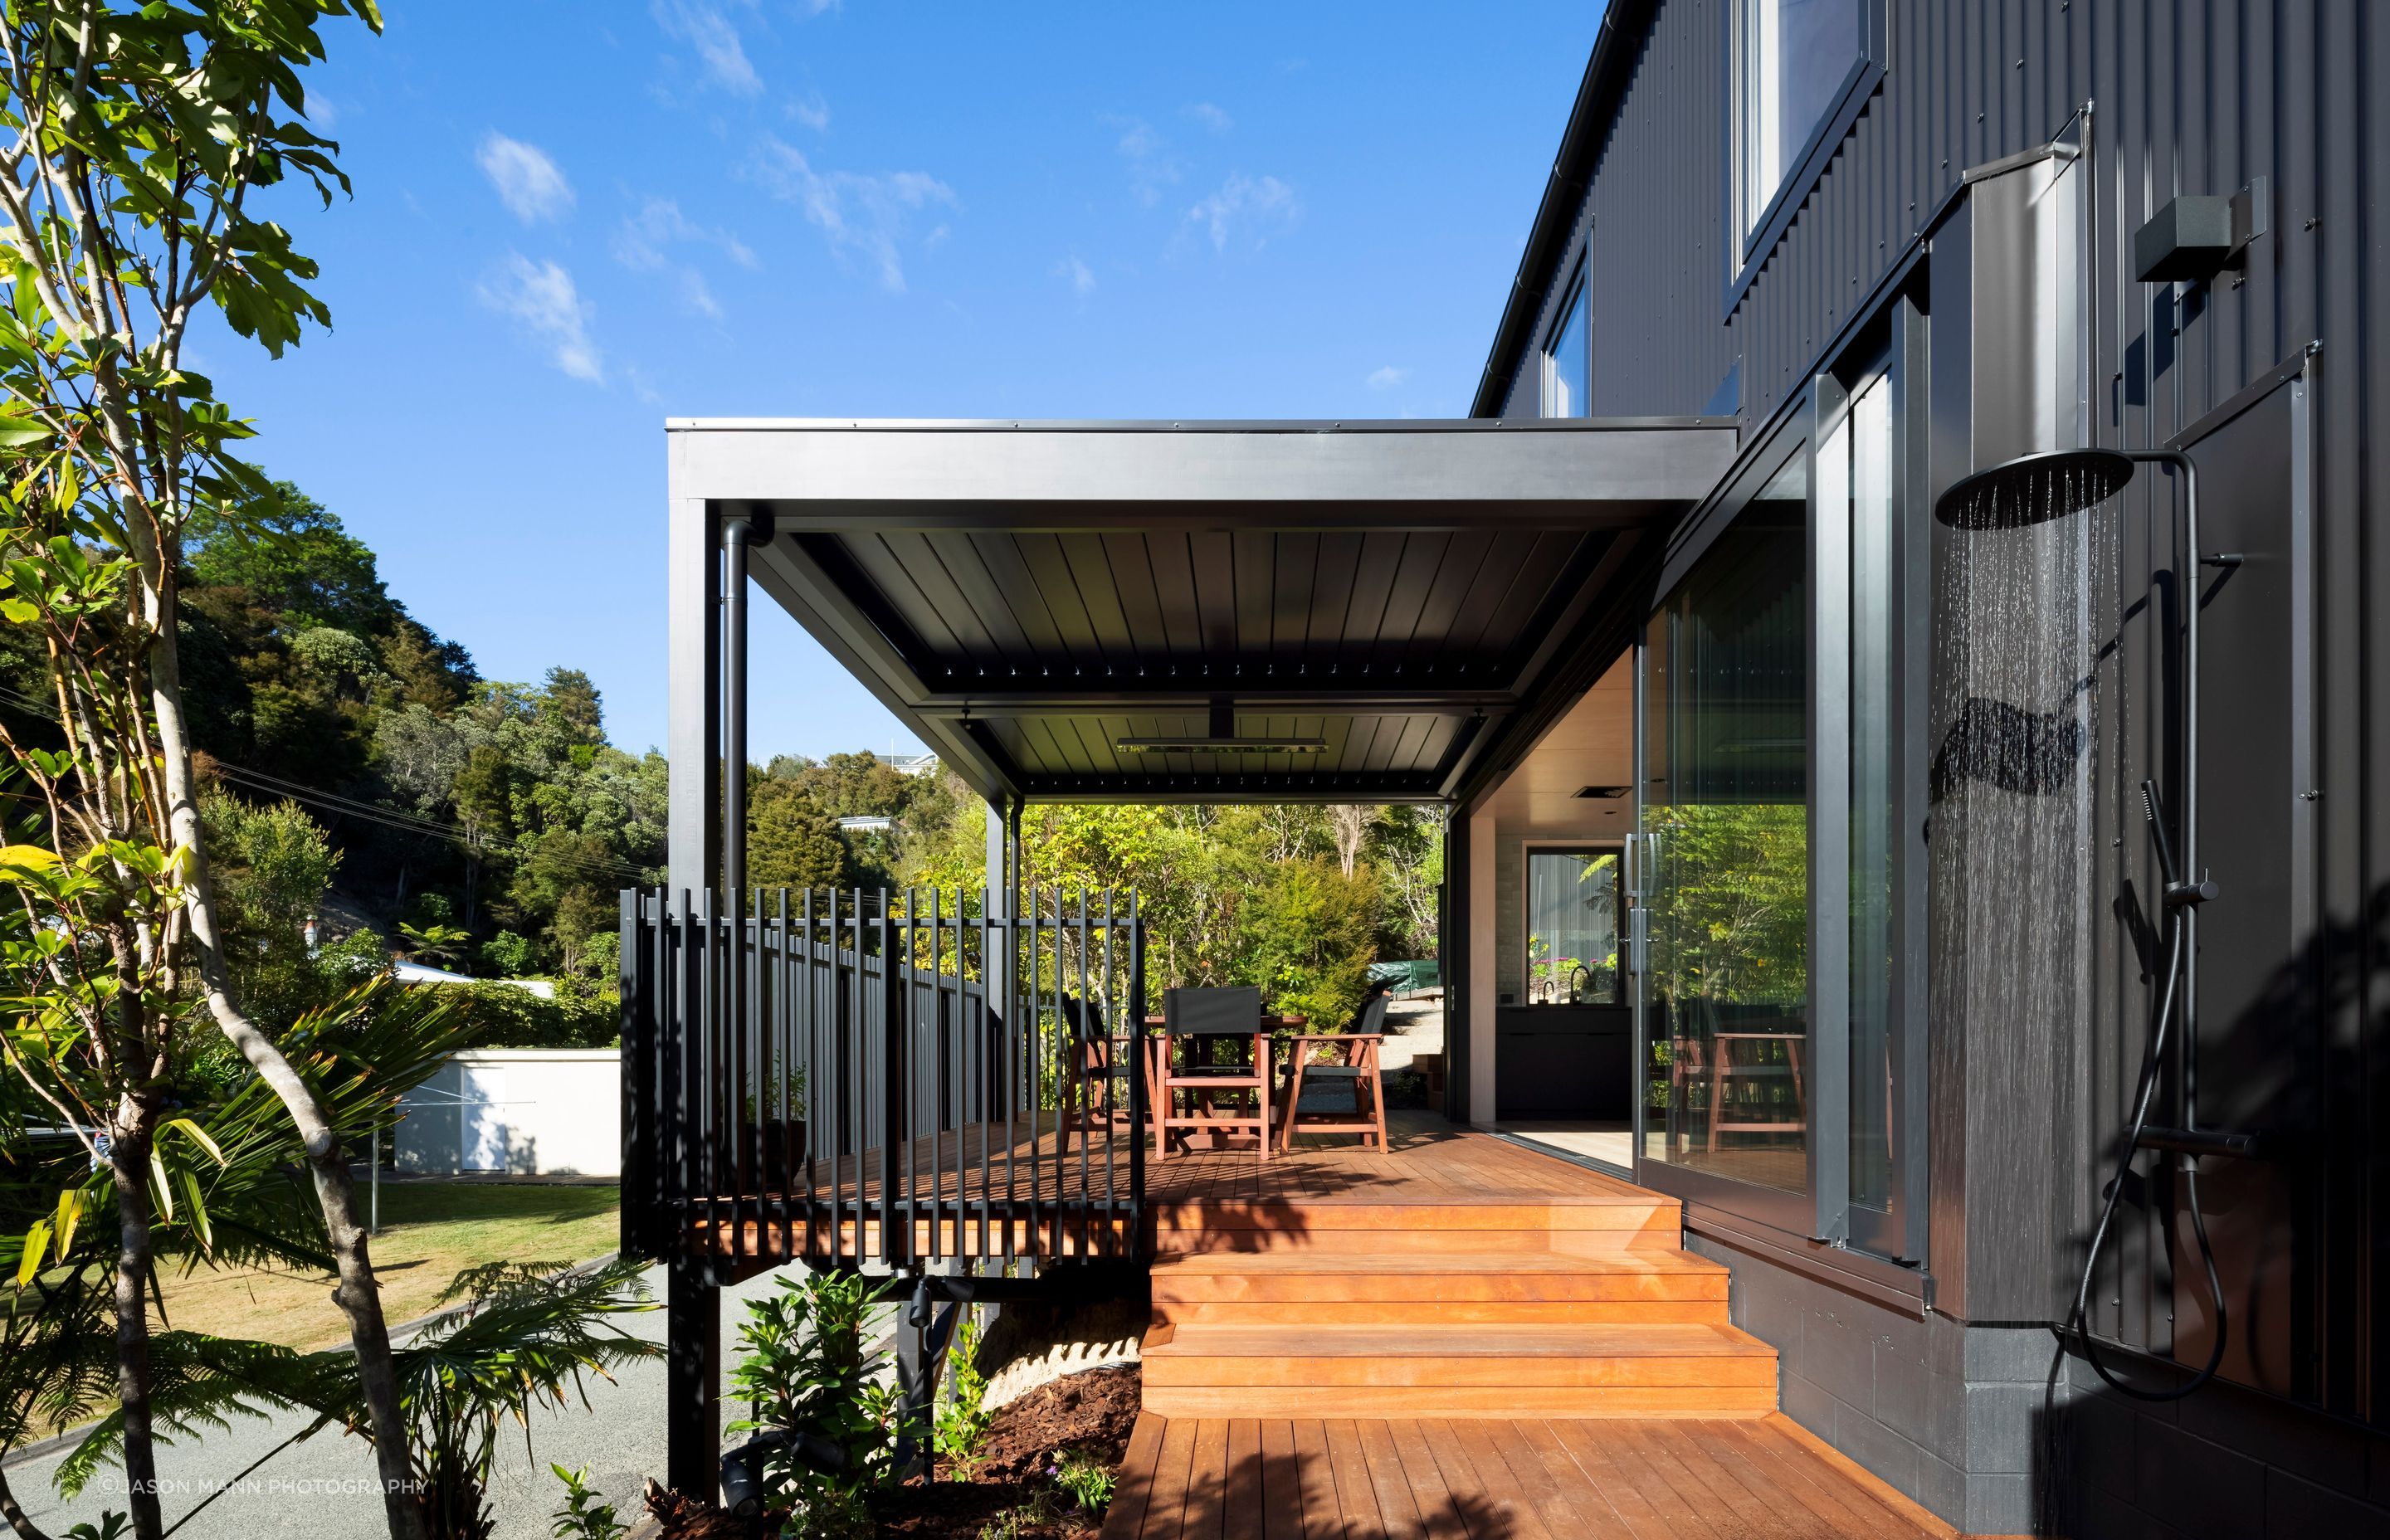 Operable louvres over the central deck increase the area of covered living space outside the small building footprint.”